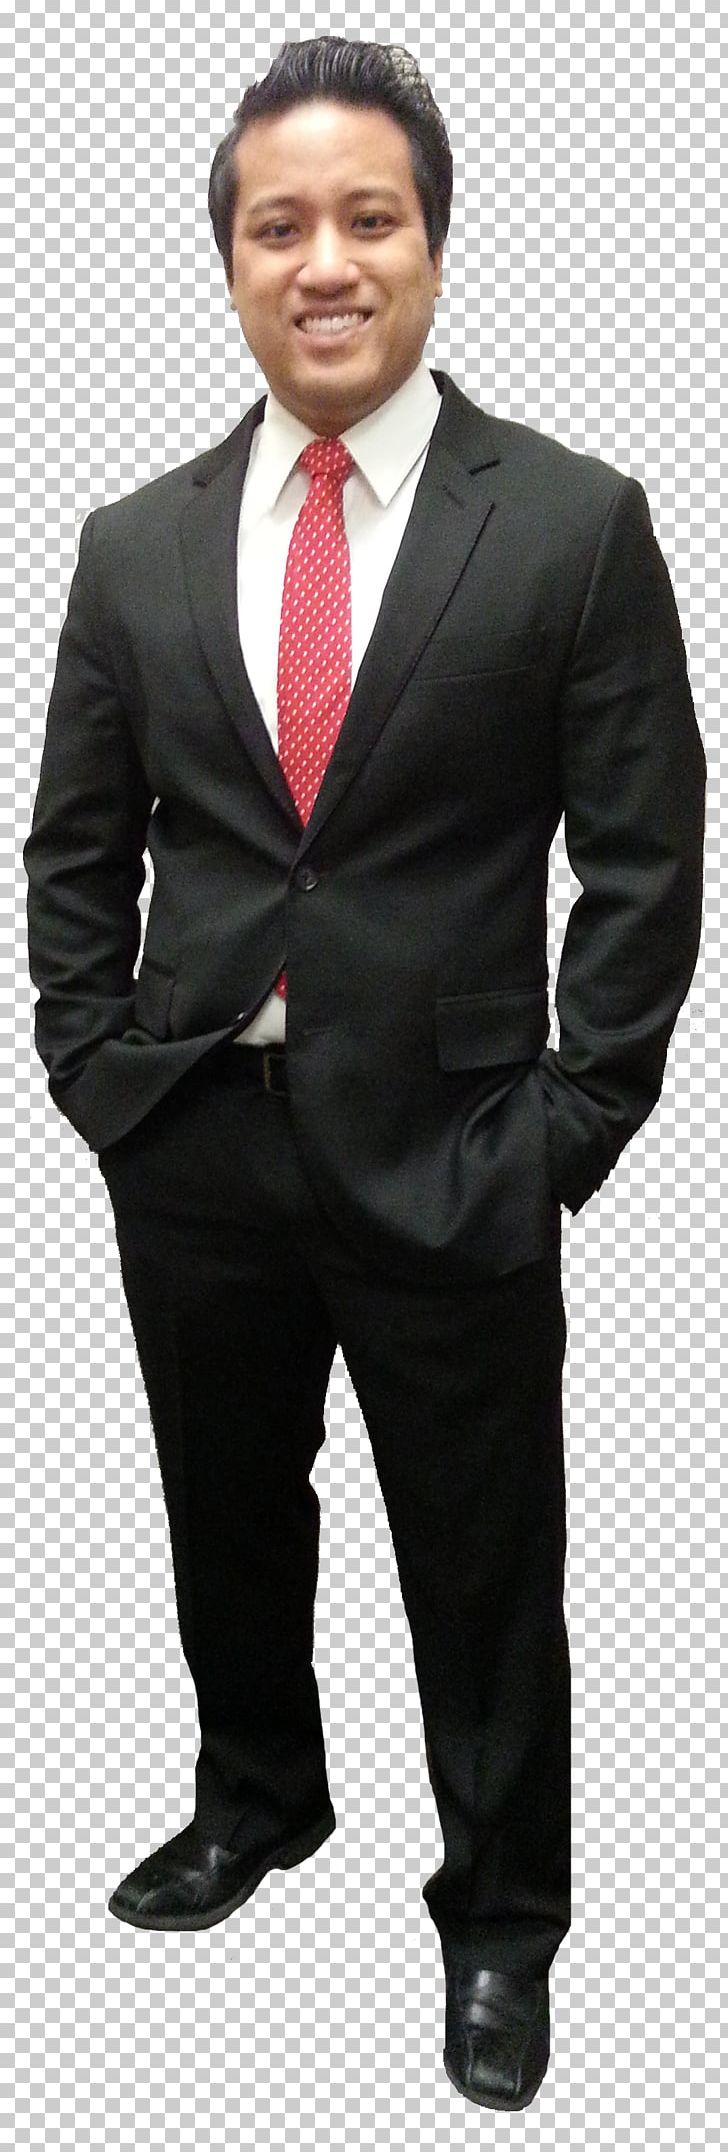 Amazon.com Clothing Tailor Tuxedo Costume PNG, Clipart, Amazoncom, Blazer, Business, Businessperson, Clothing Free PNG Download